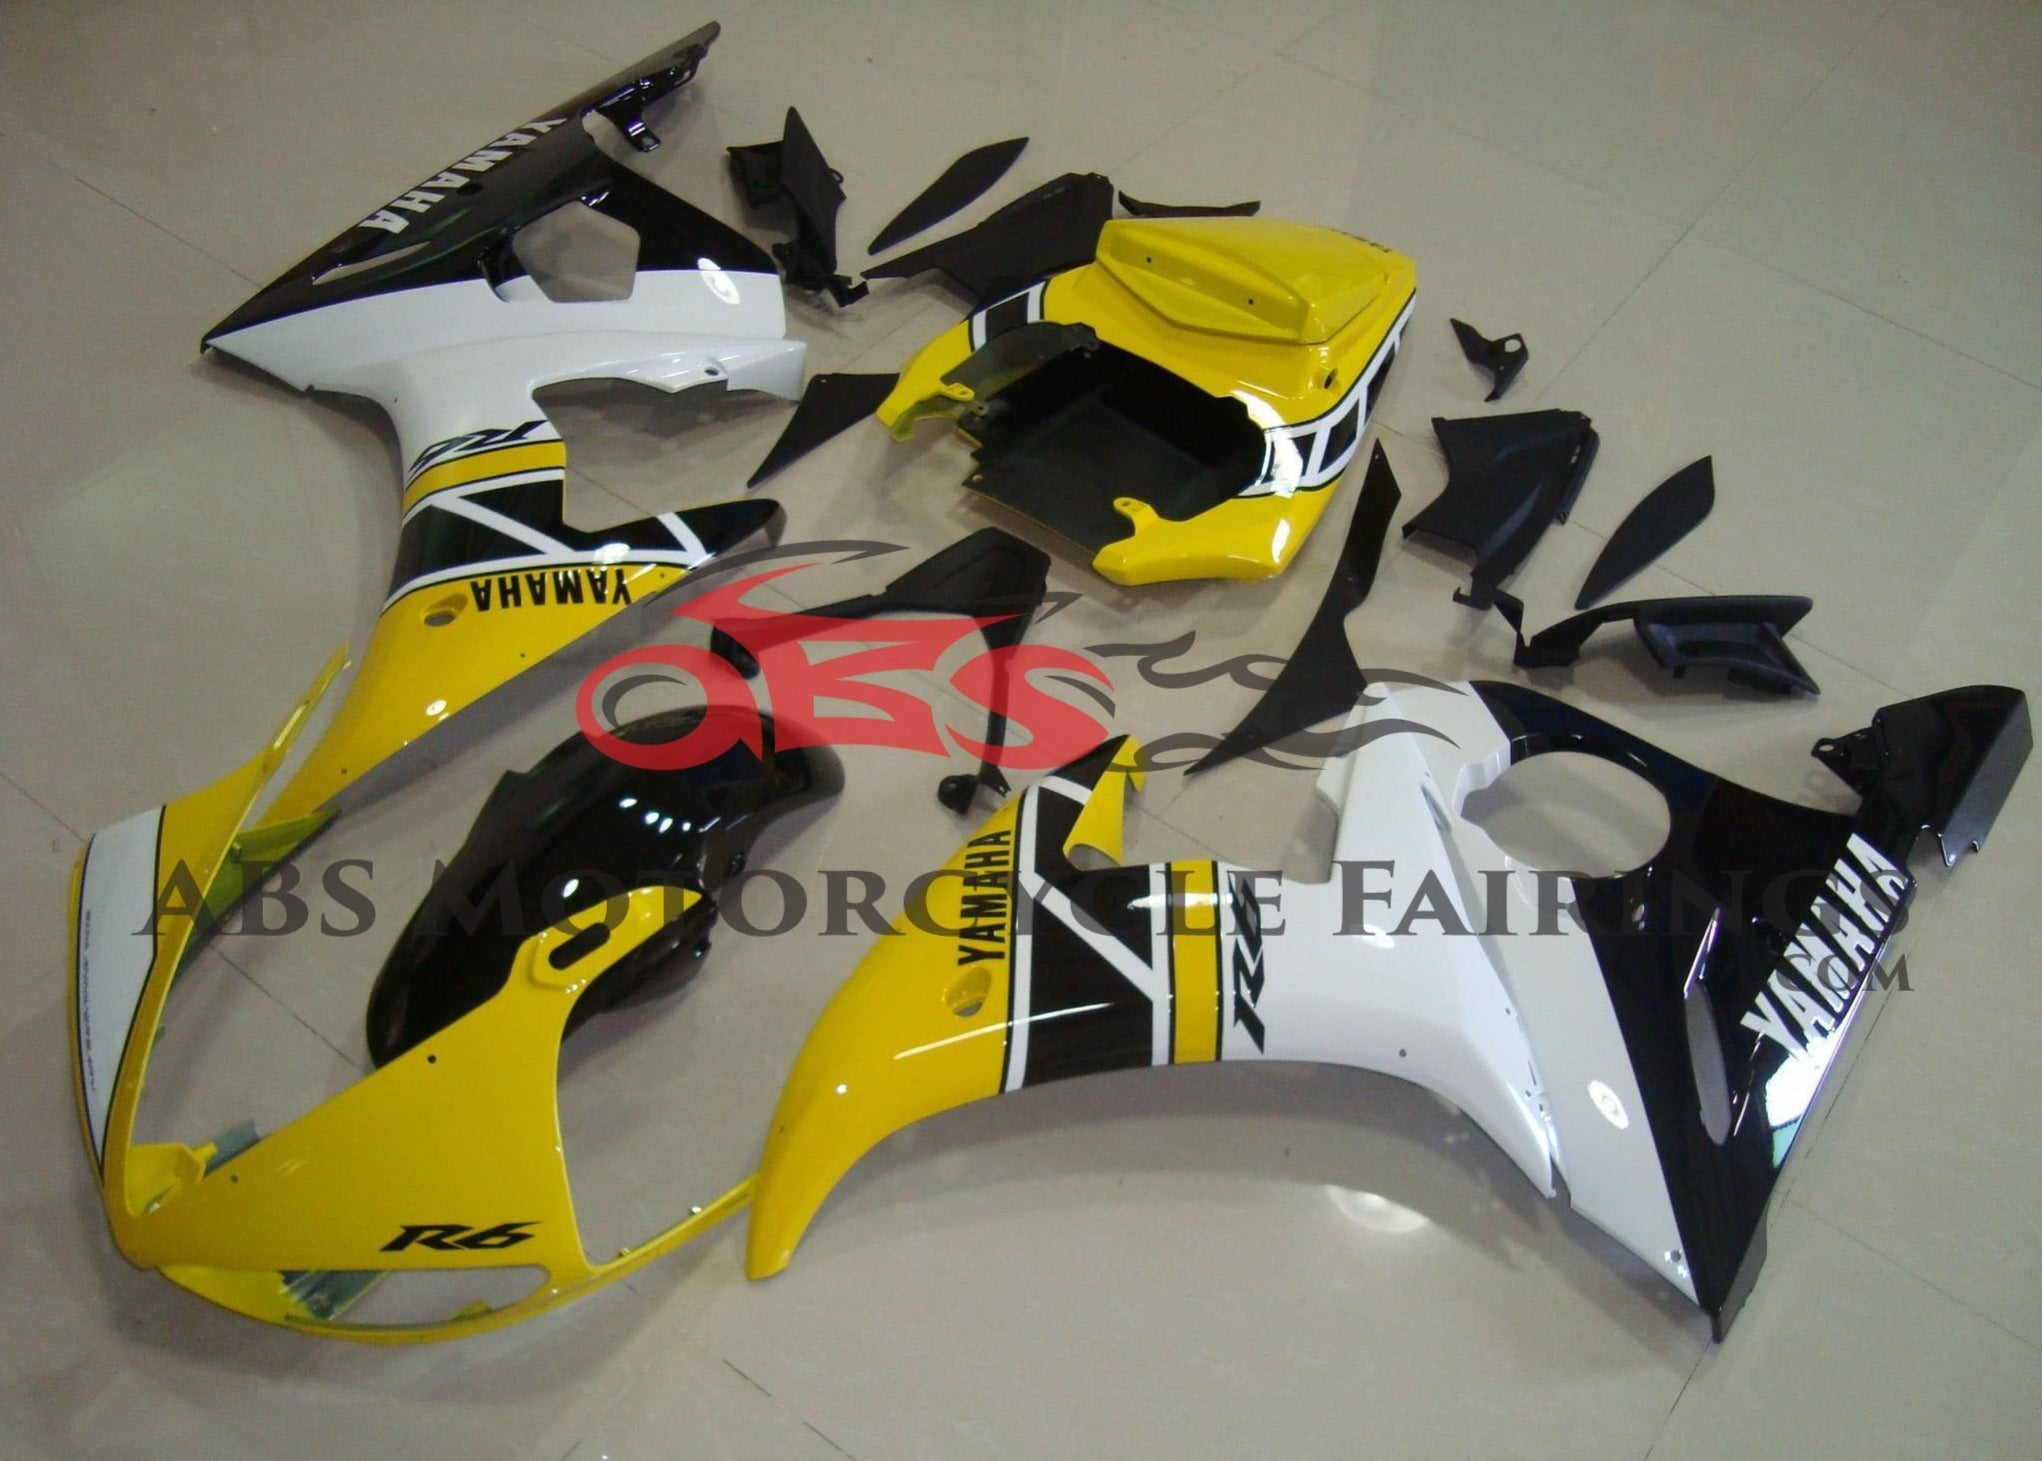  Full White Moto Fitting For Yamaha YZFR6 YZF R6 YZF-R6 R6  YZF600 YZF 600 2003 2004 Motorcycle Complete Fairings (Injection molding) :  Automotive